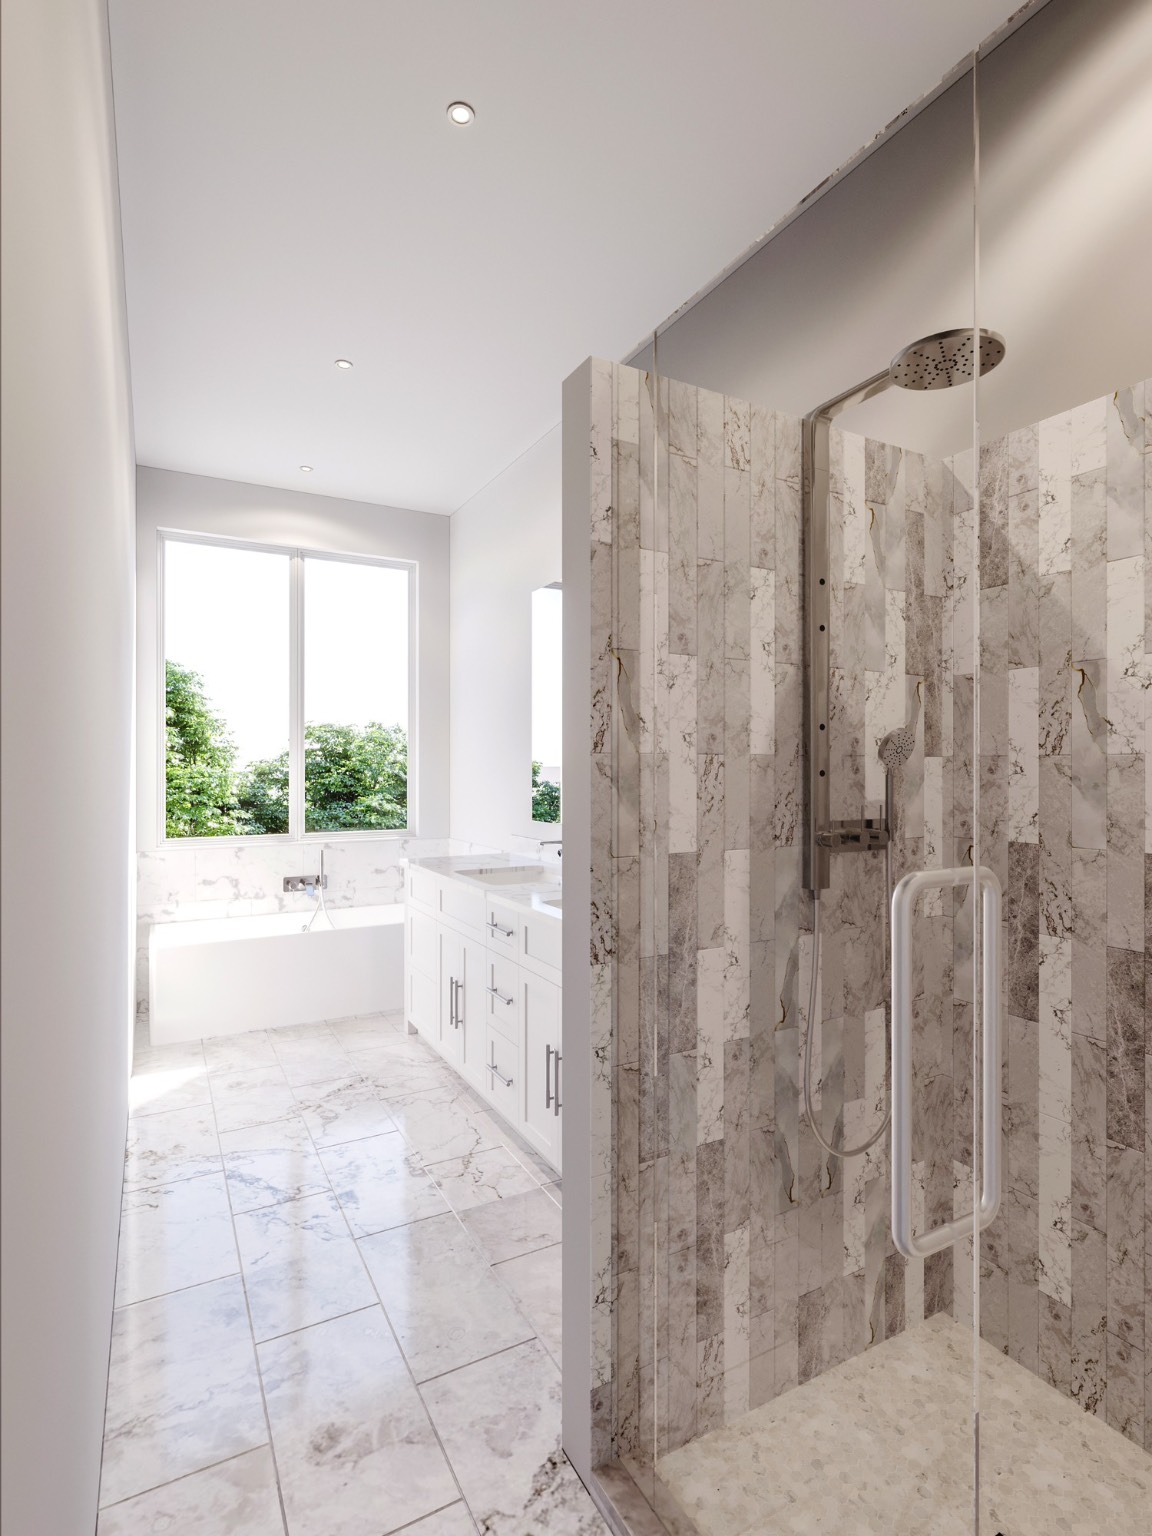 Primary suite bathroom designed with luxurious marble flooring, featuring a sophisticated double vanity setup, a sleek stand-alone bathtub, and a spacious walk-in shower with a frameless design. Architectural rendering.